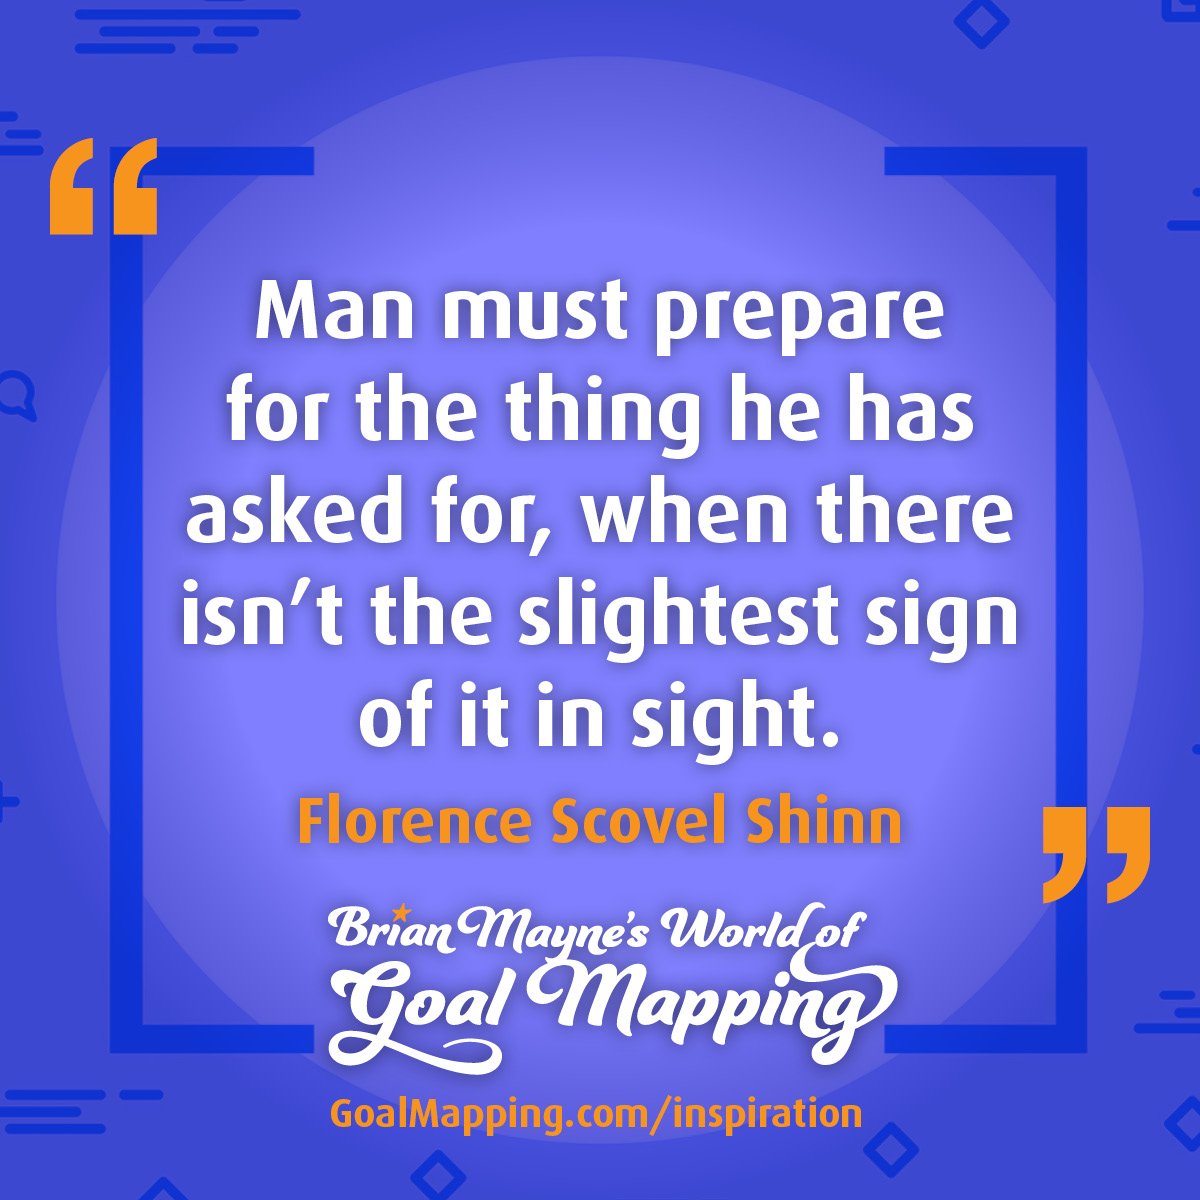 "Man must prepare for the thing he has asked for, when there isn’t the slightest sign of it in sight." Florence Scovel Shinn